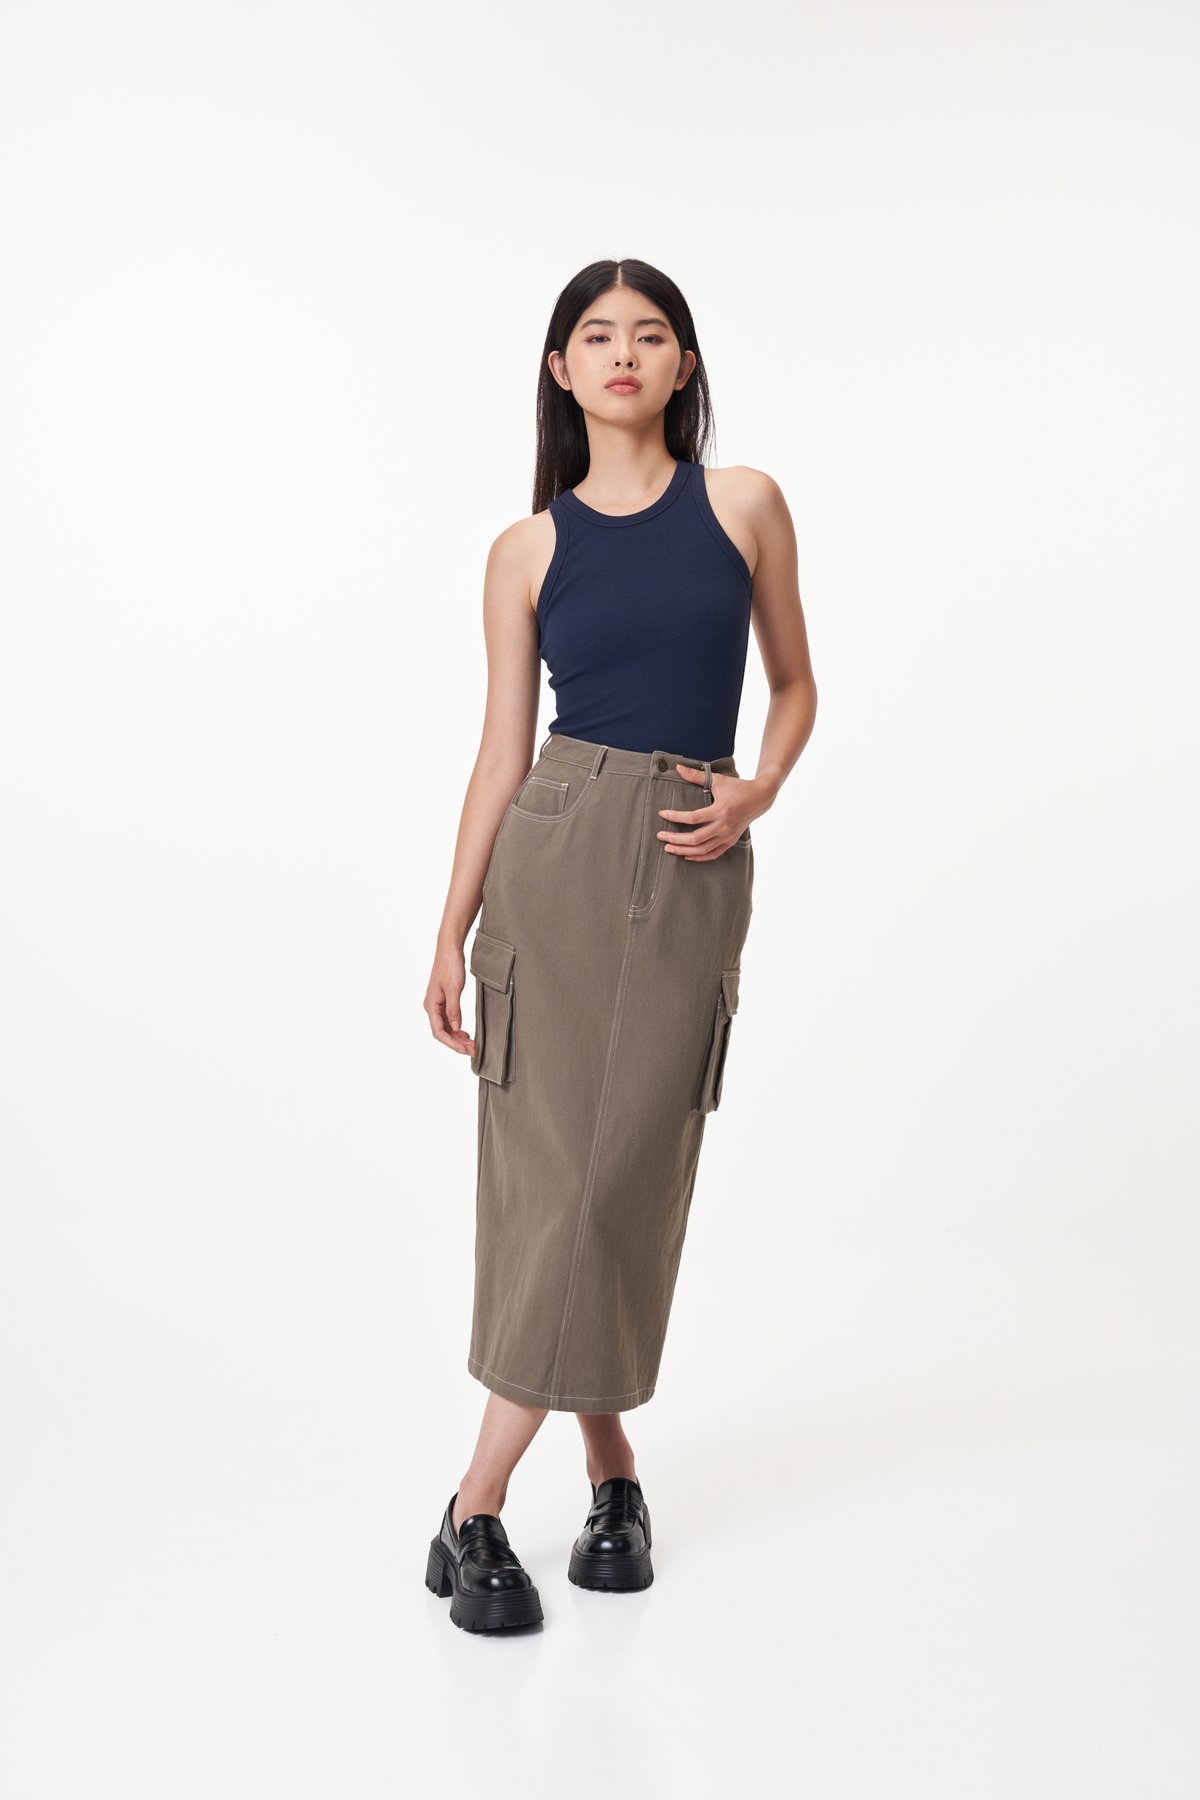 Jonas Contrast Stitch Skirt in Taupe